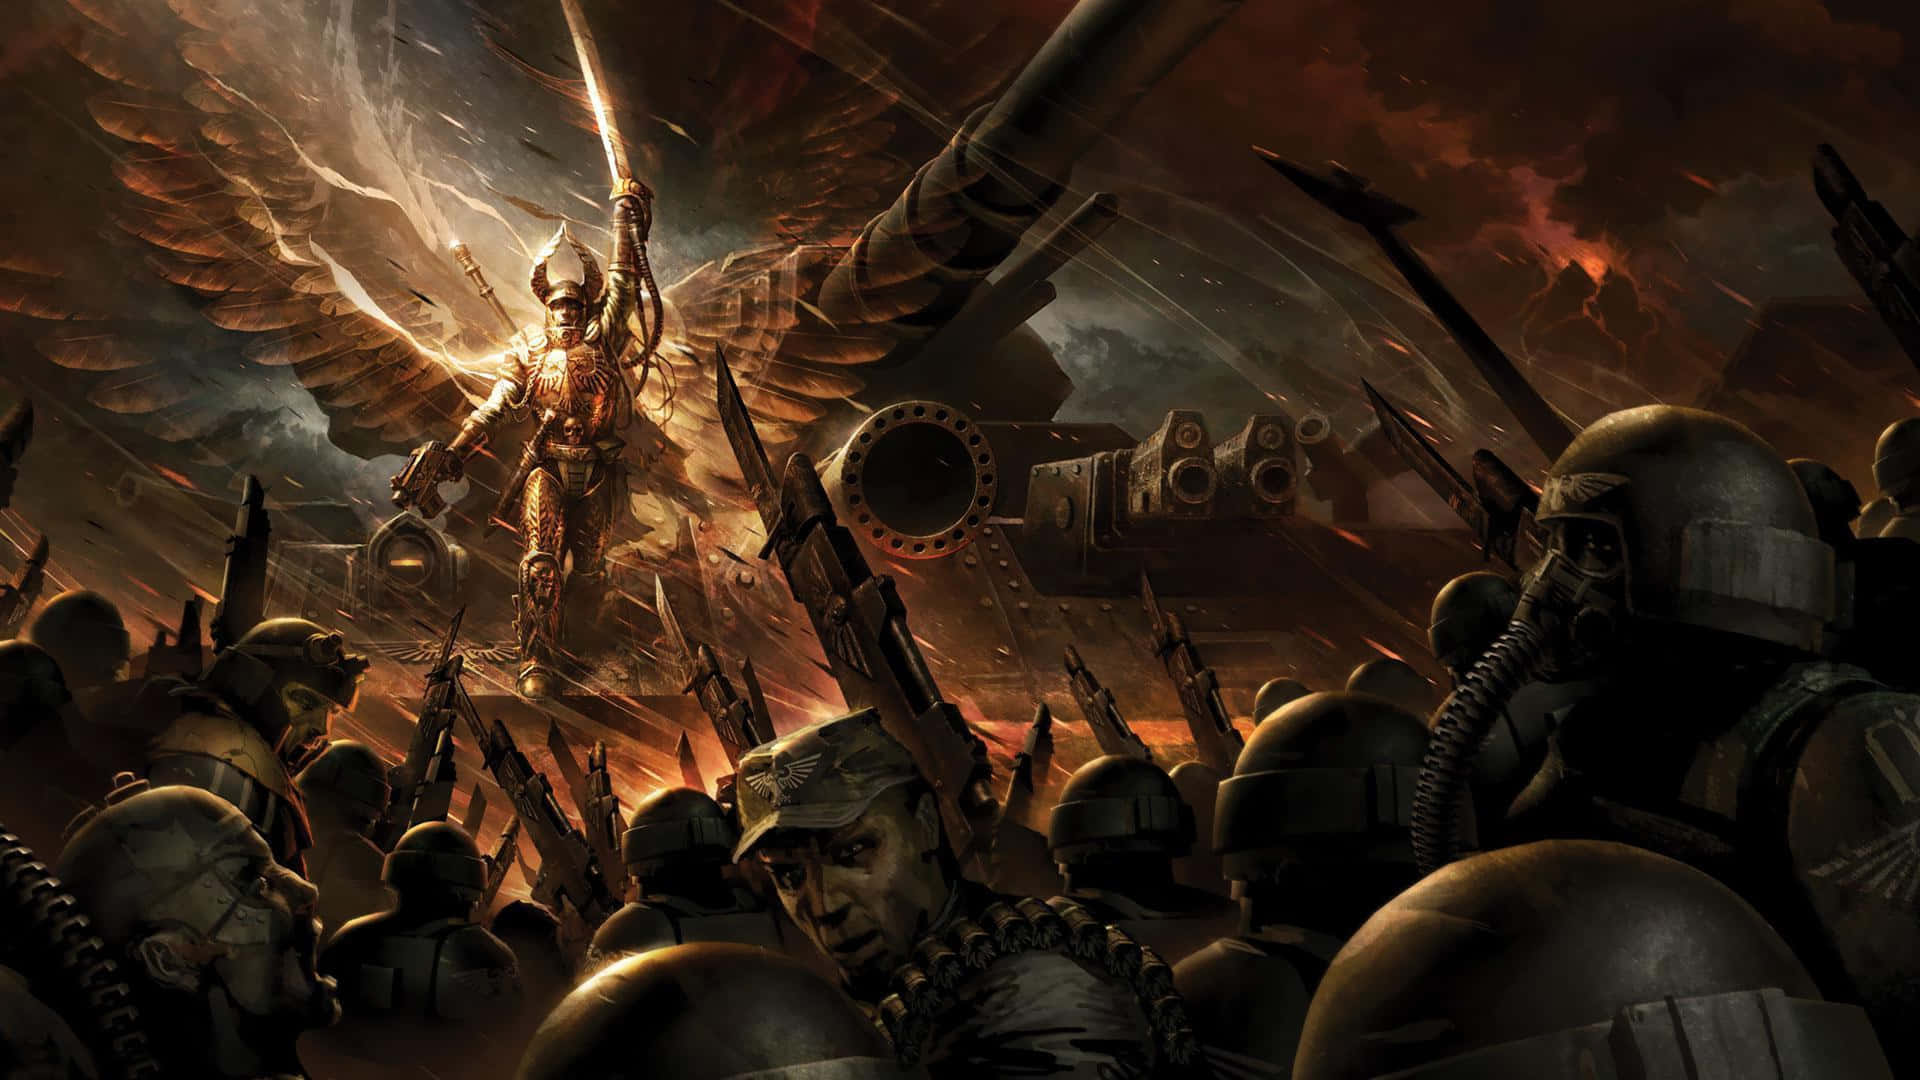 Battle it out with Total War: Warhammer